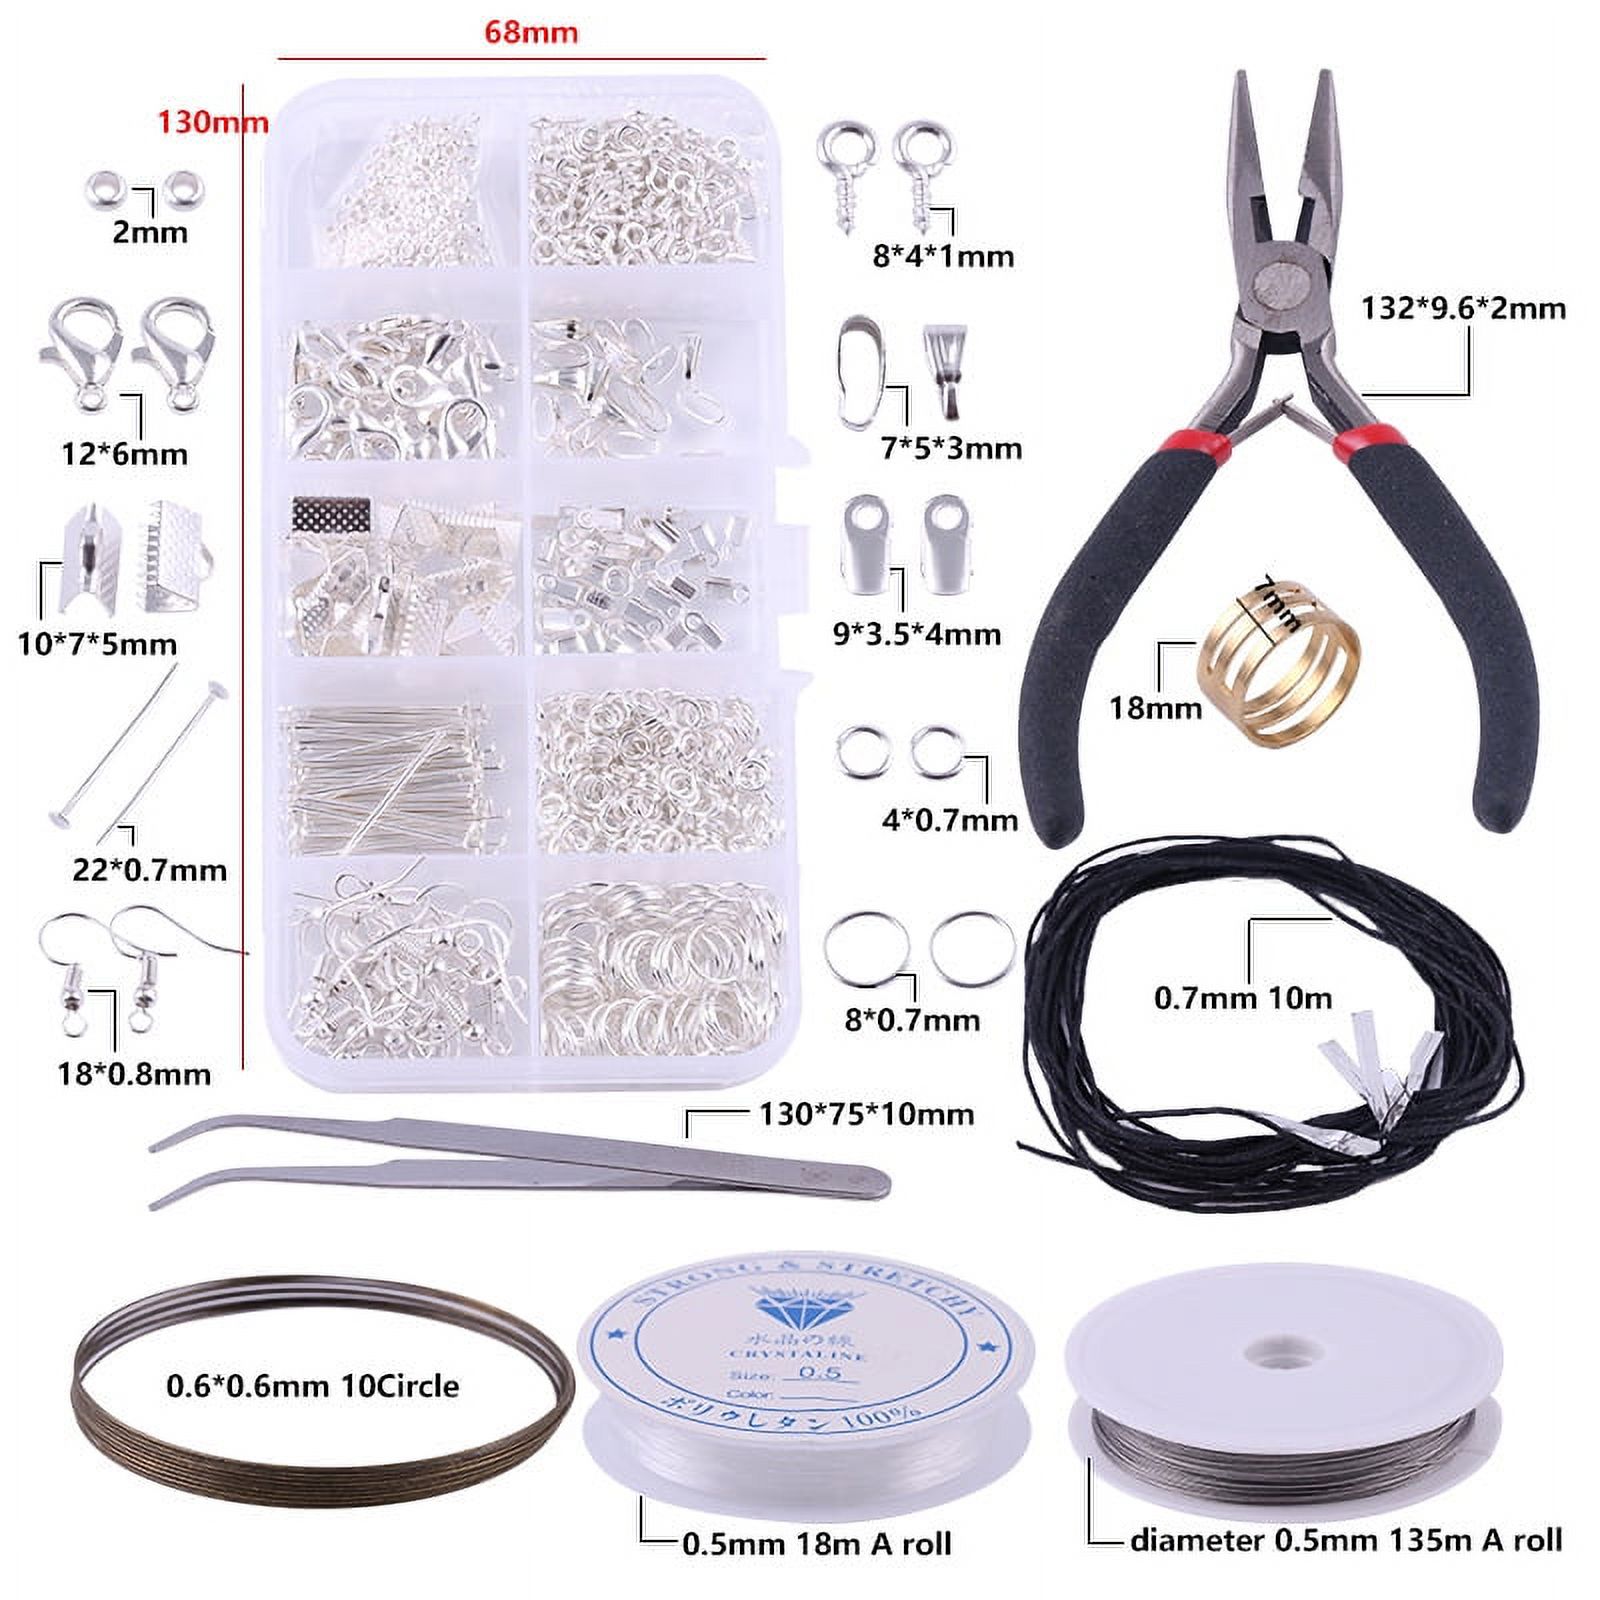 Jewelry Making Supplies Kit - Jewelry Repair Tool with Accessories